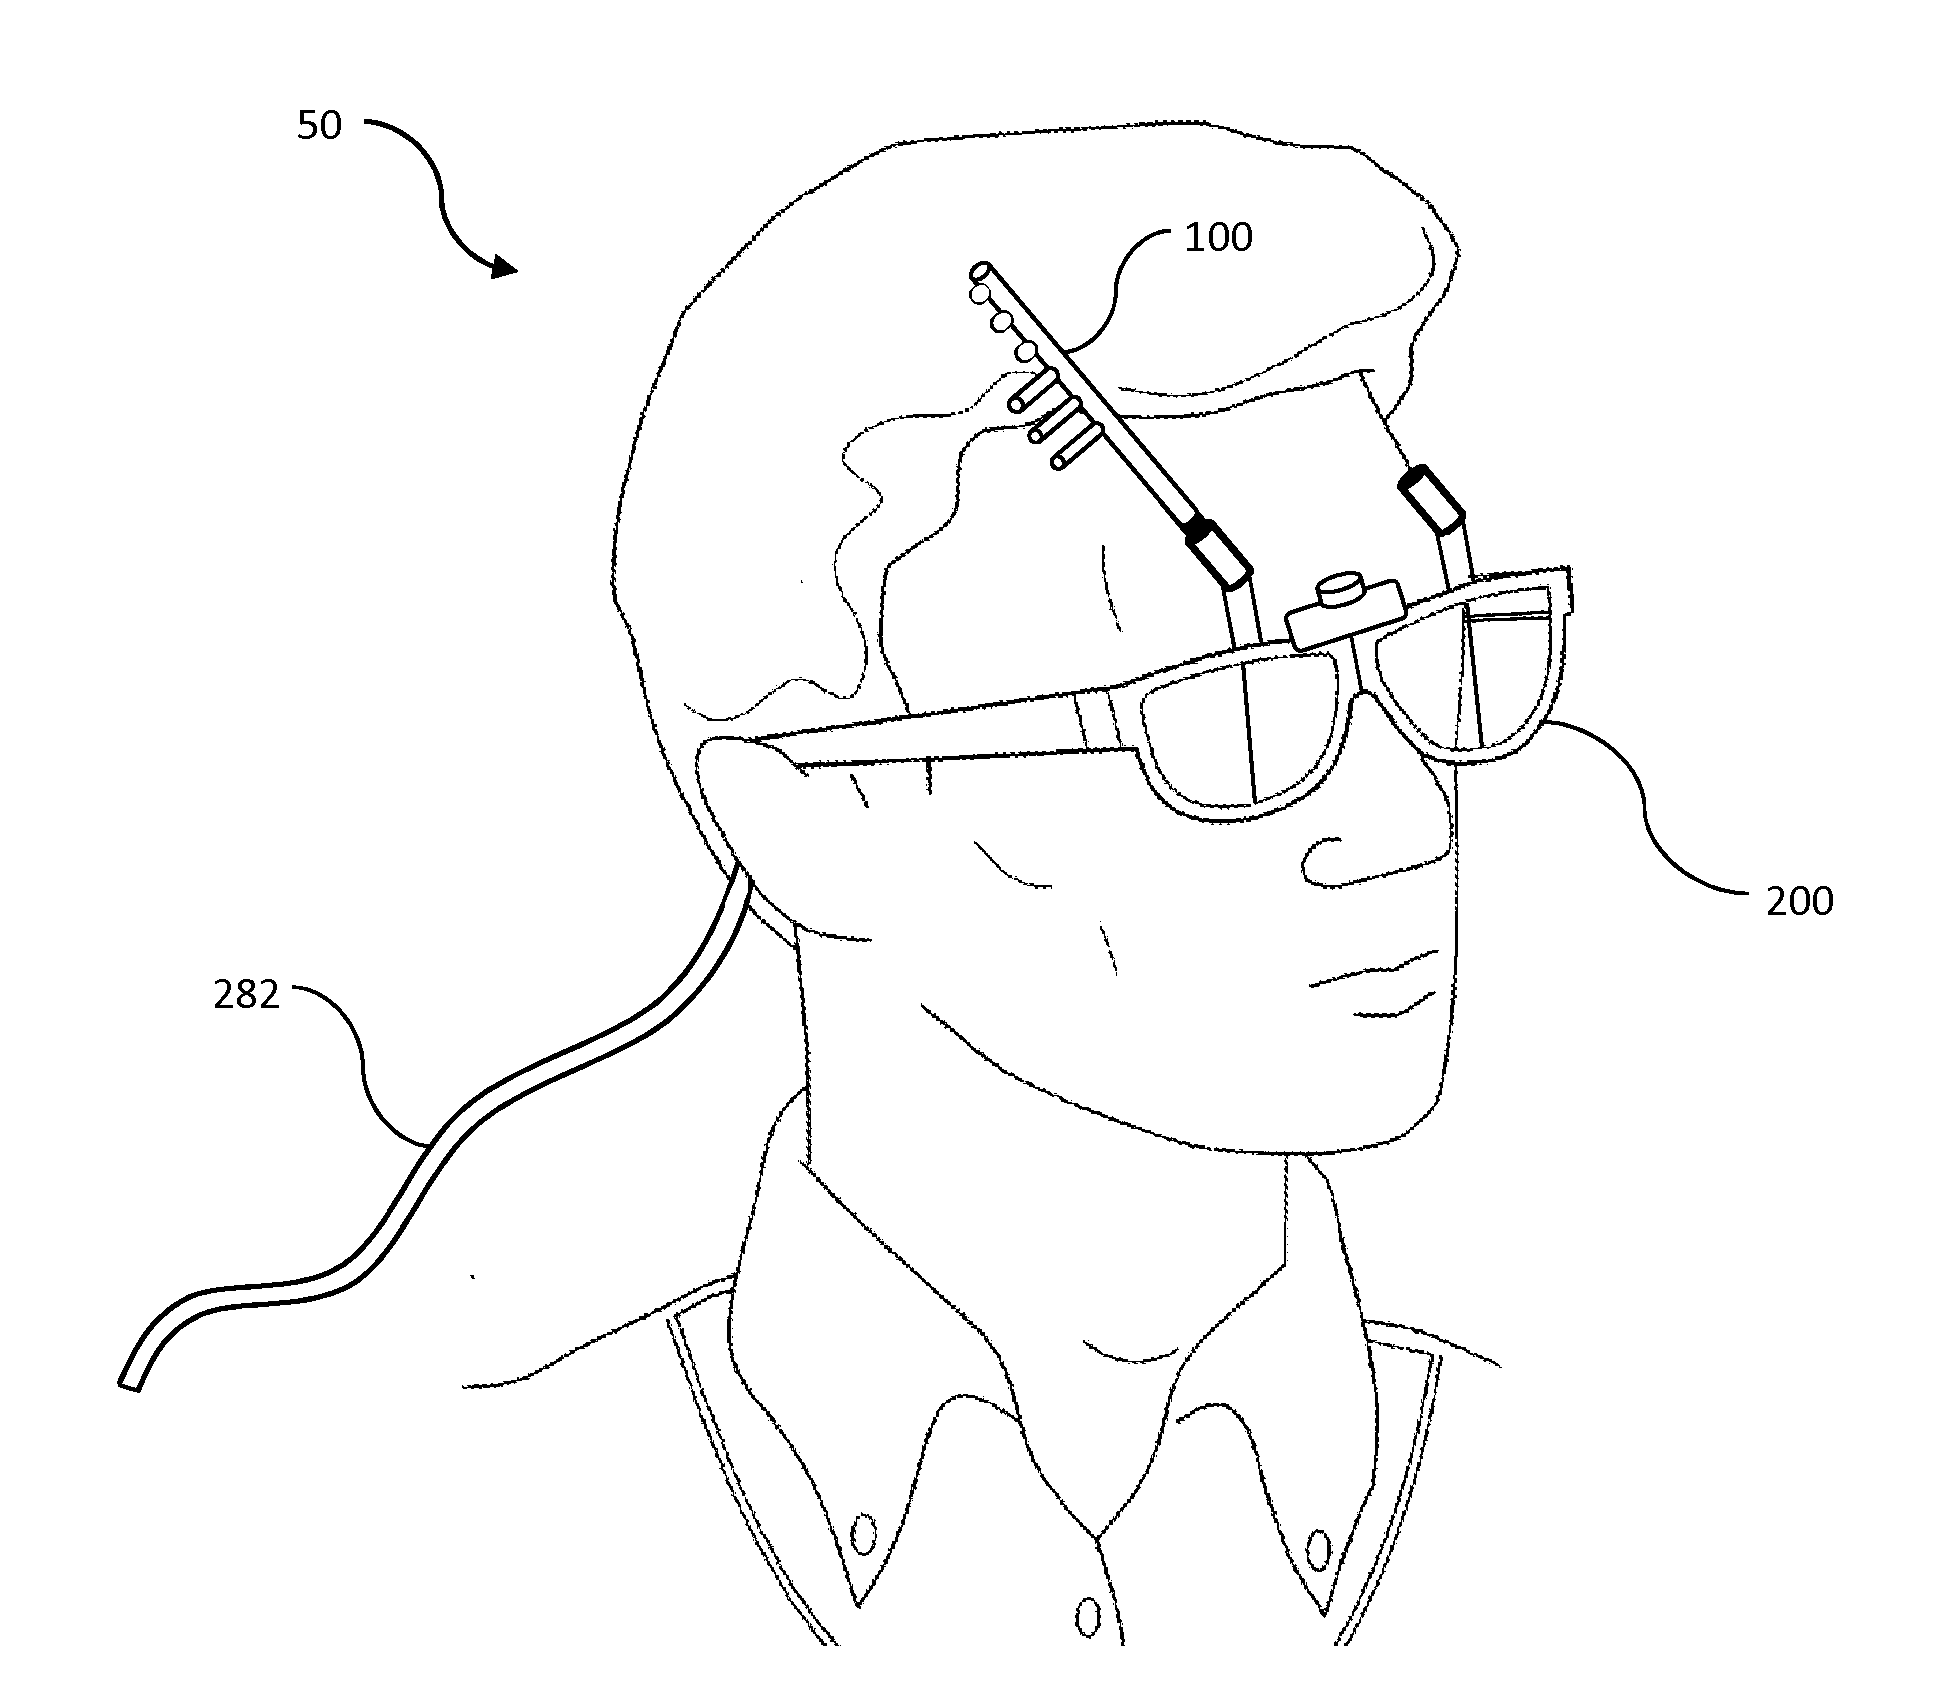 Methods and head-mounted devices for pain relief by stimulating treatment lines along the scalp